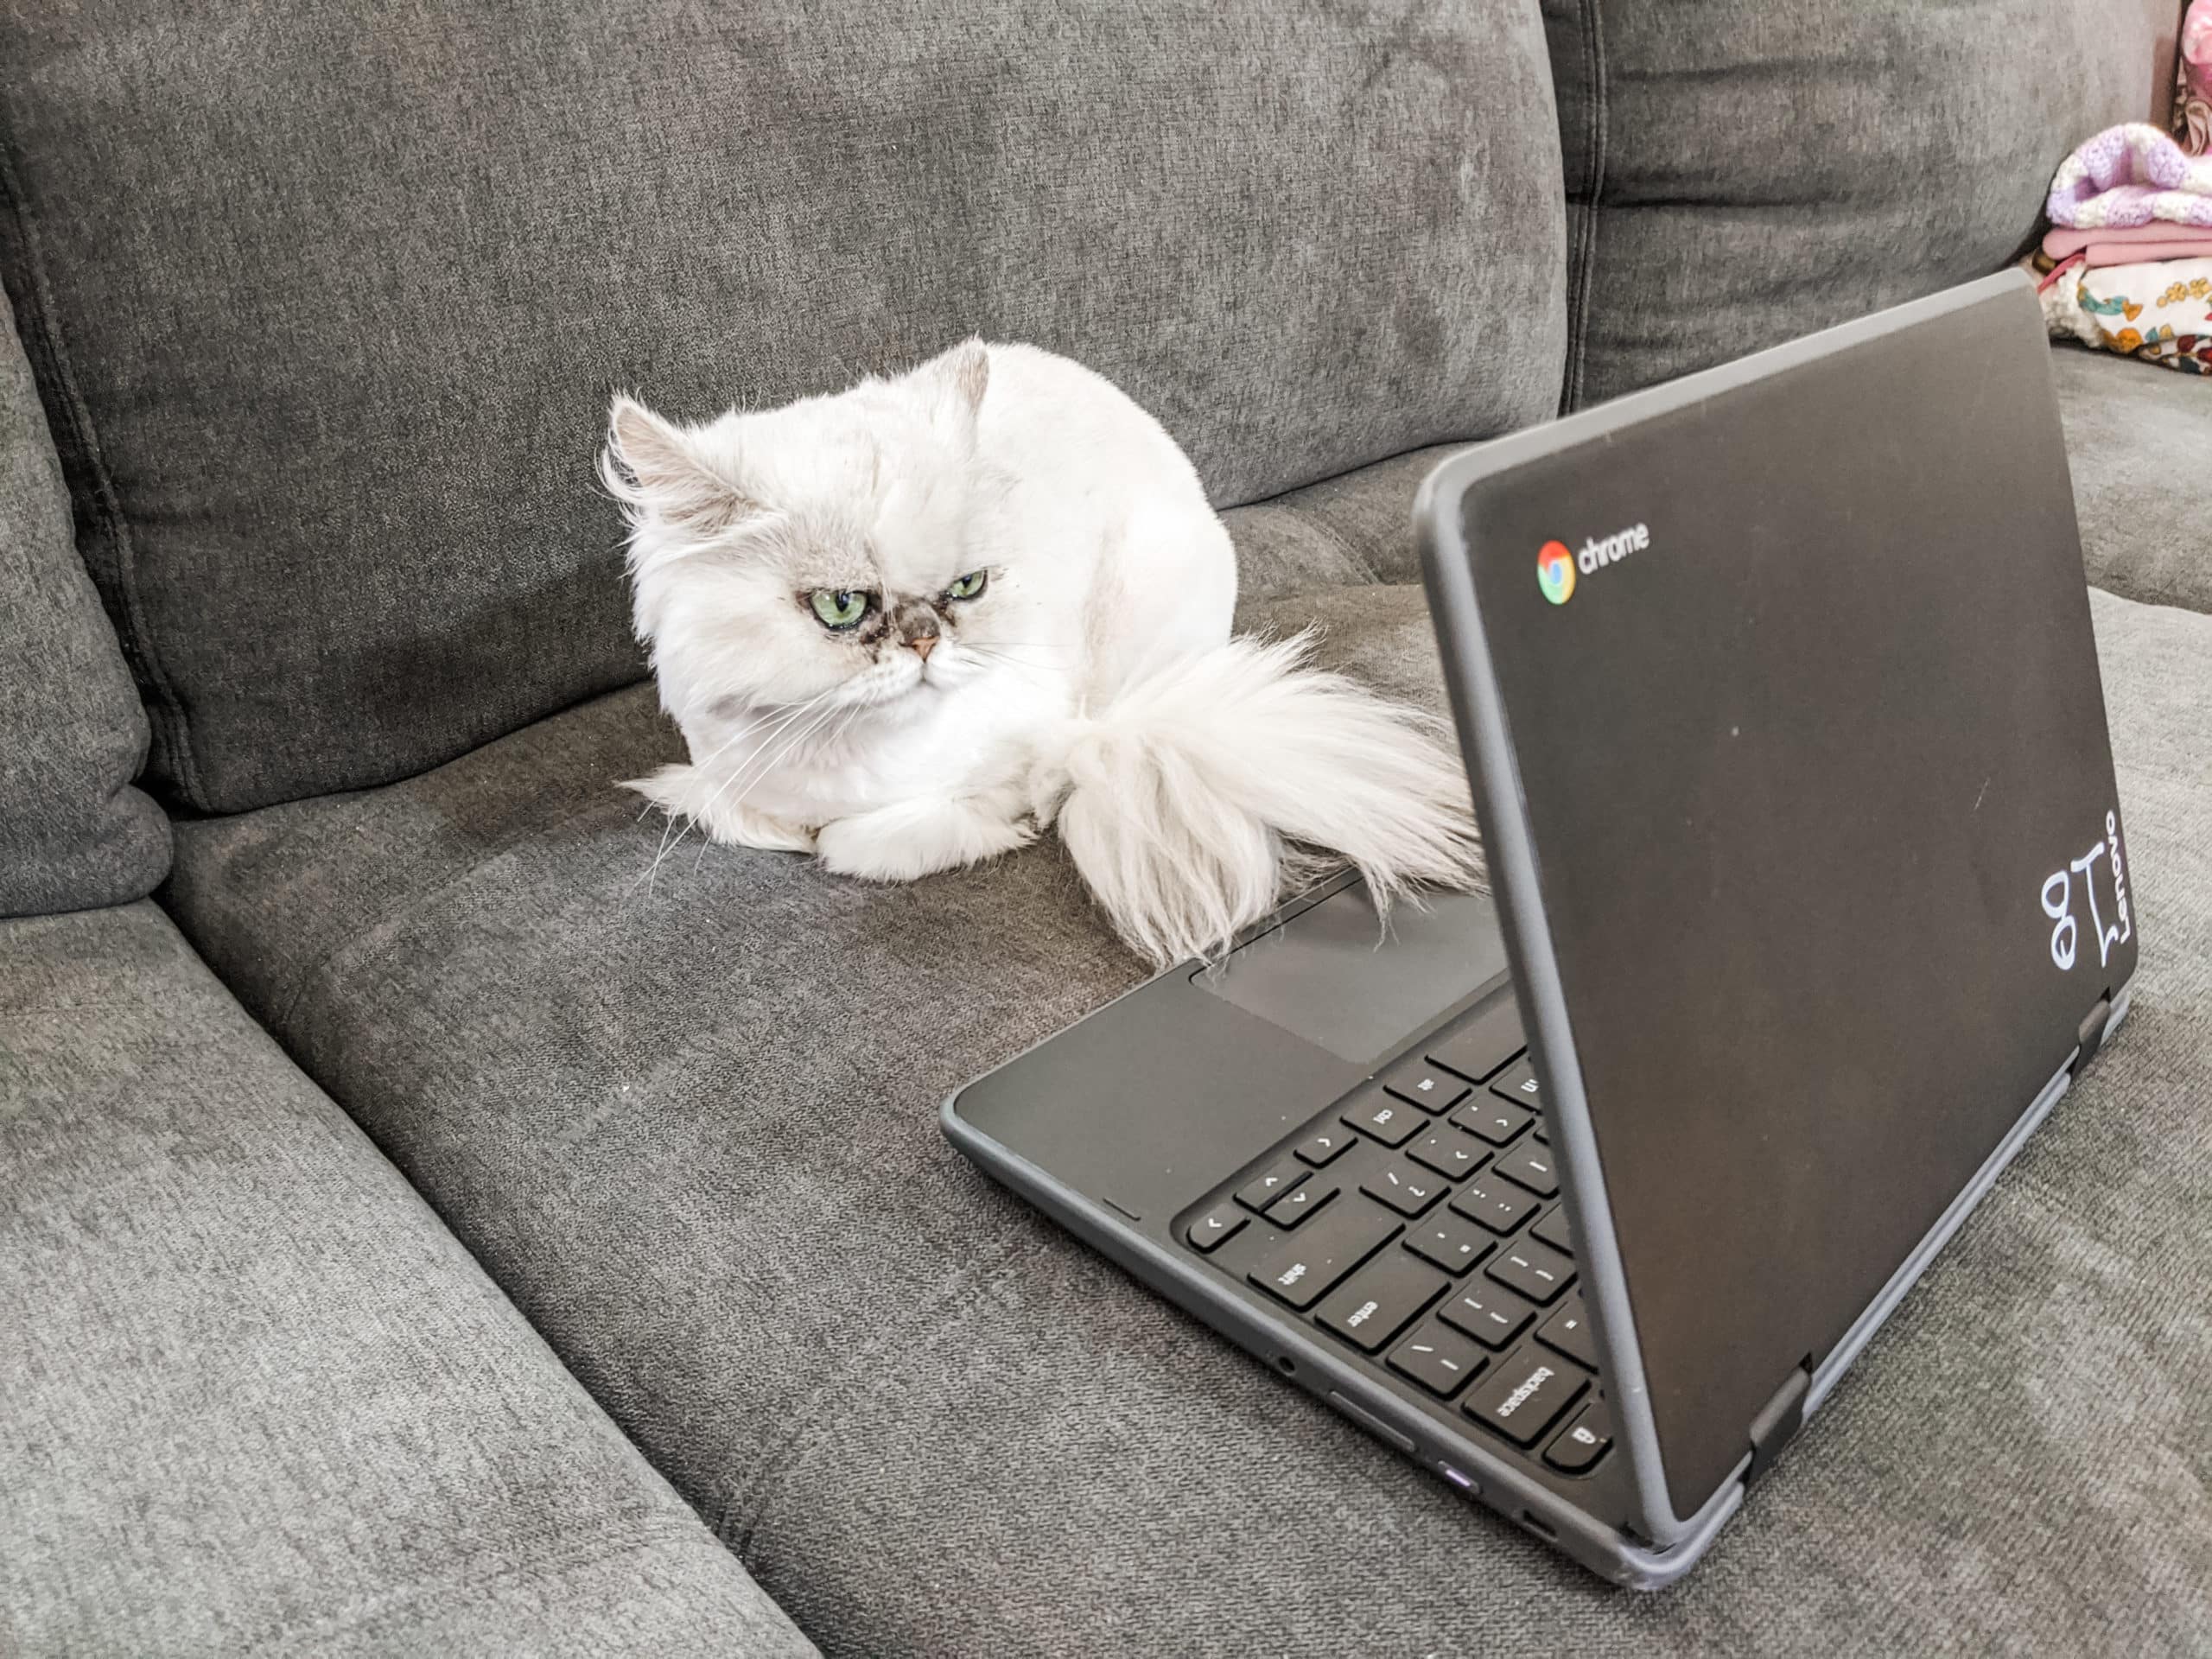 photo of cat looking at a Google Chromebook